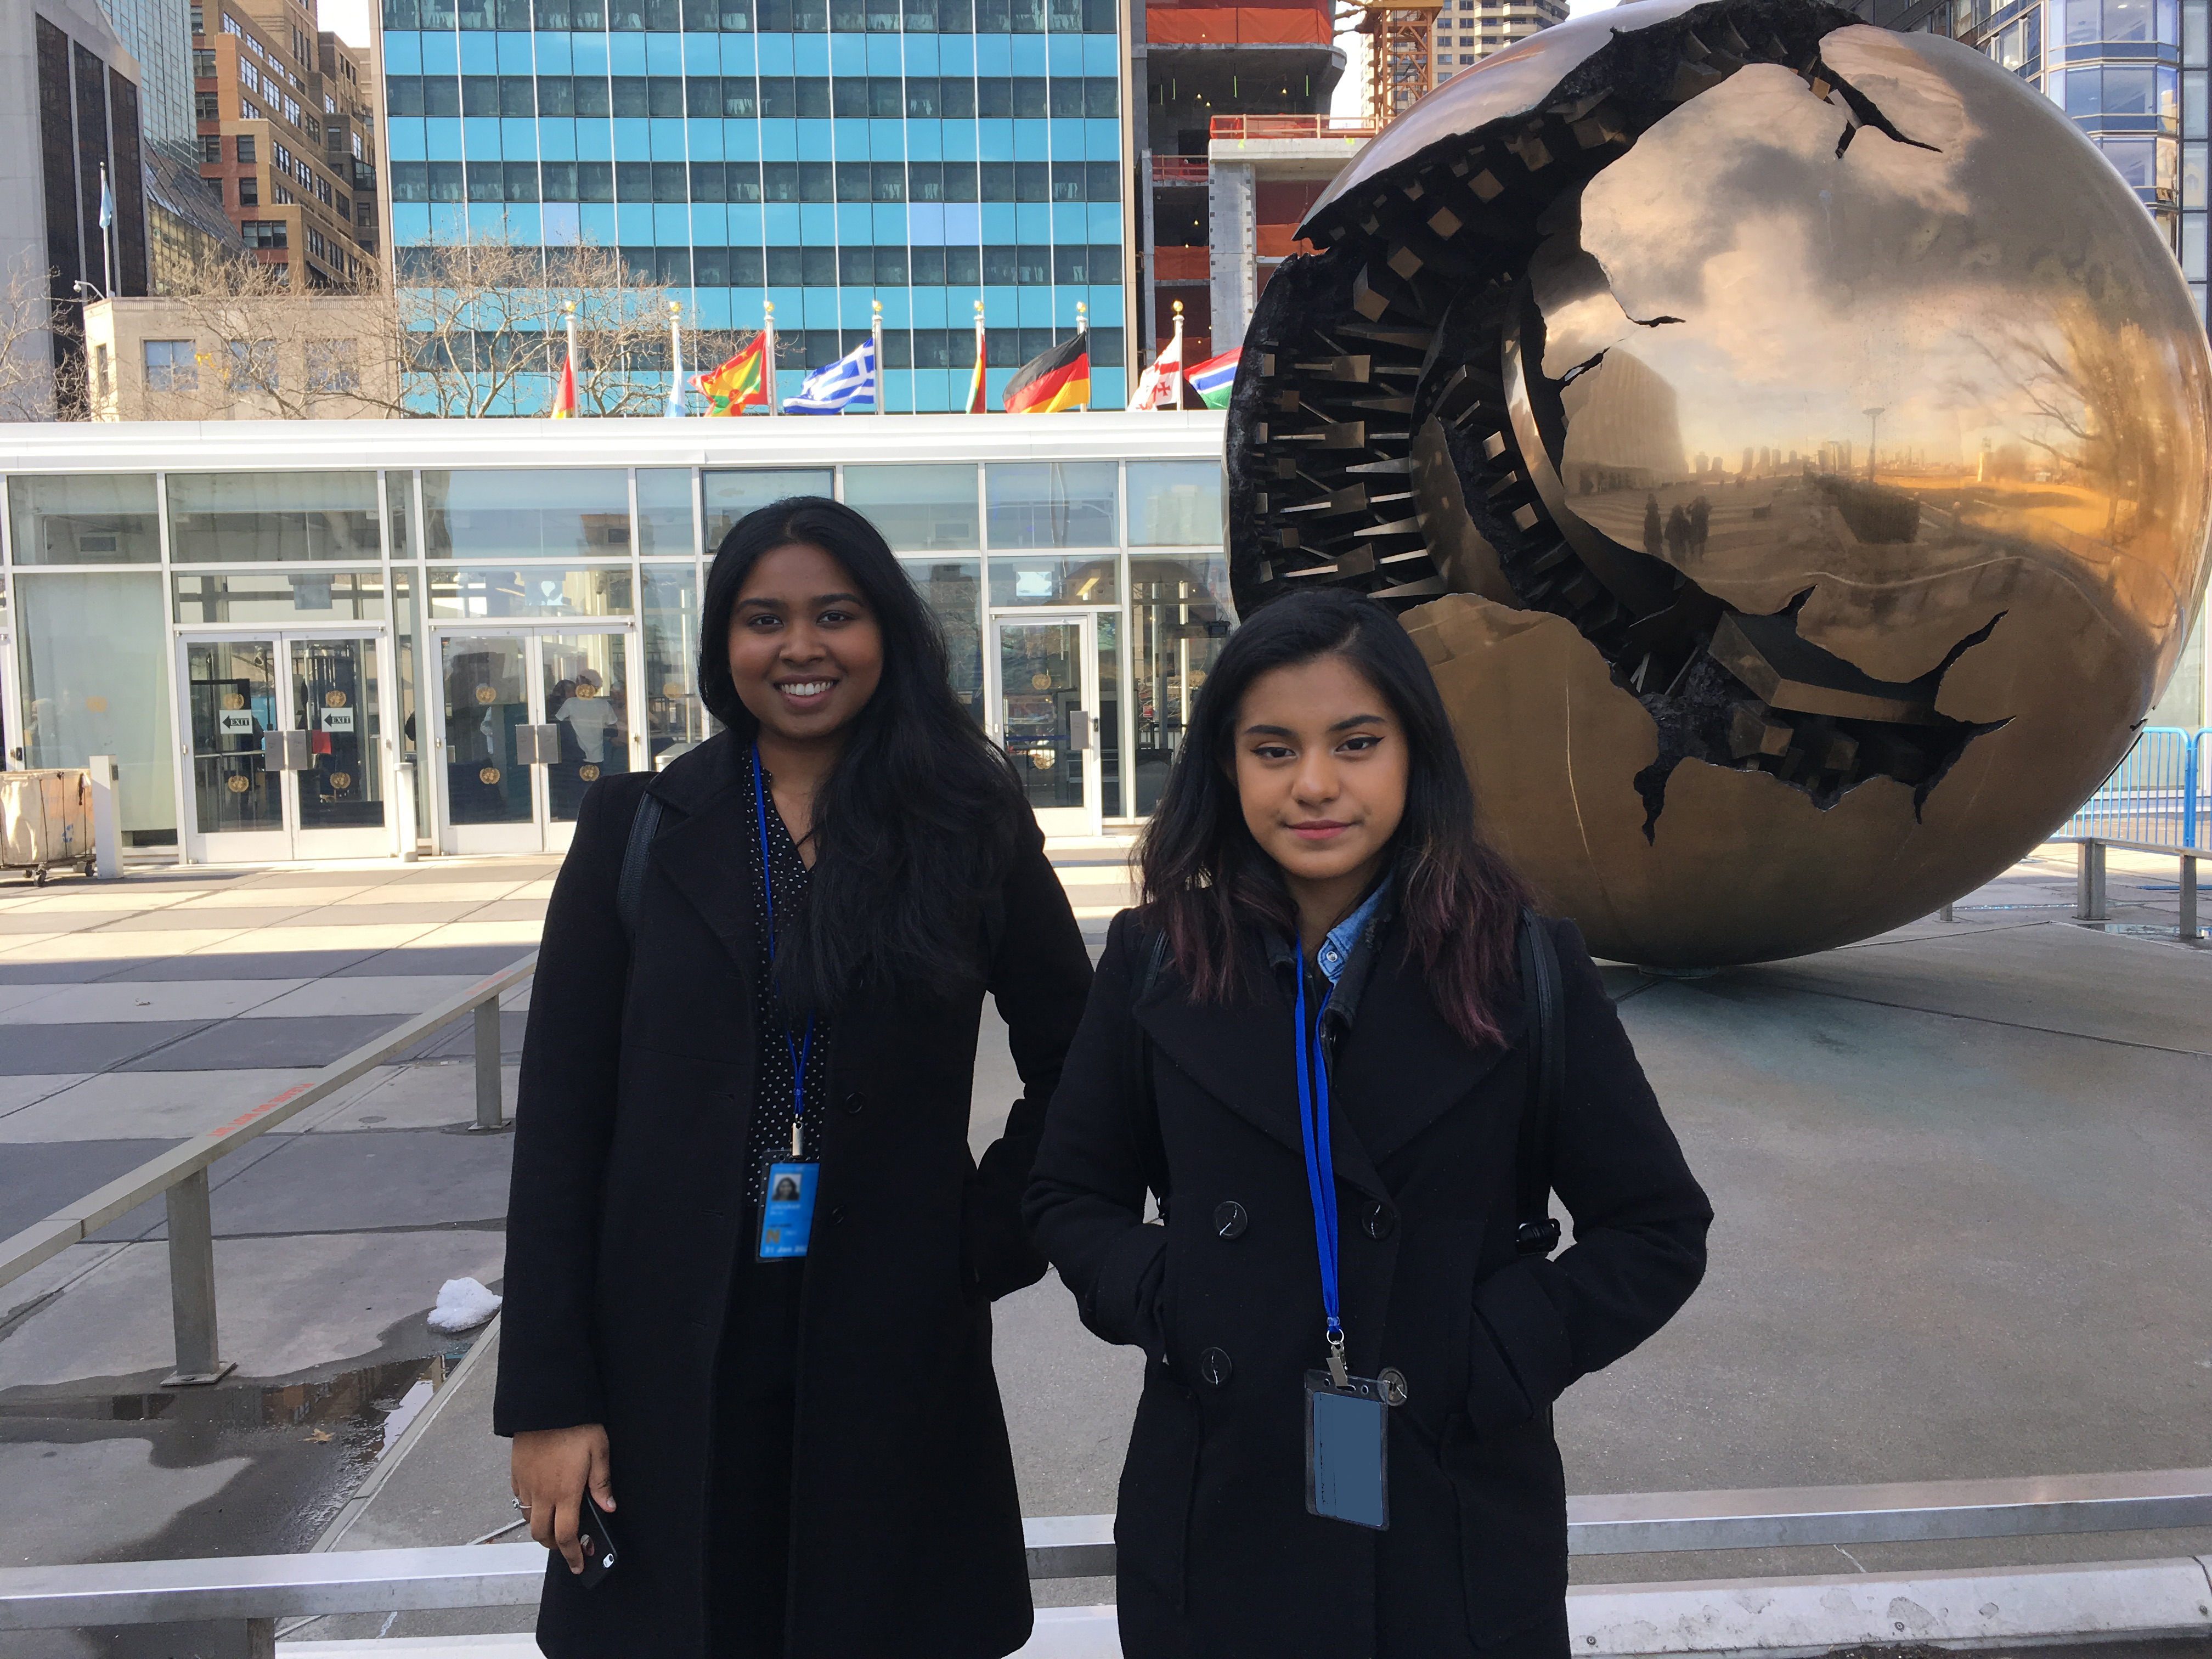 2. Shristi Sookram and Yaritza Bustamante standing in front of Sphere within Sphere by Amaldo Pomodoro at UN Plaza